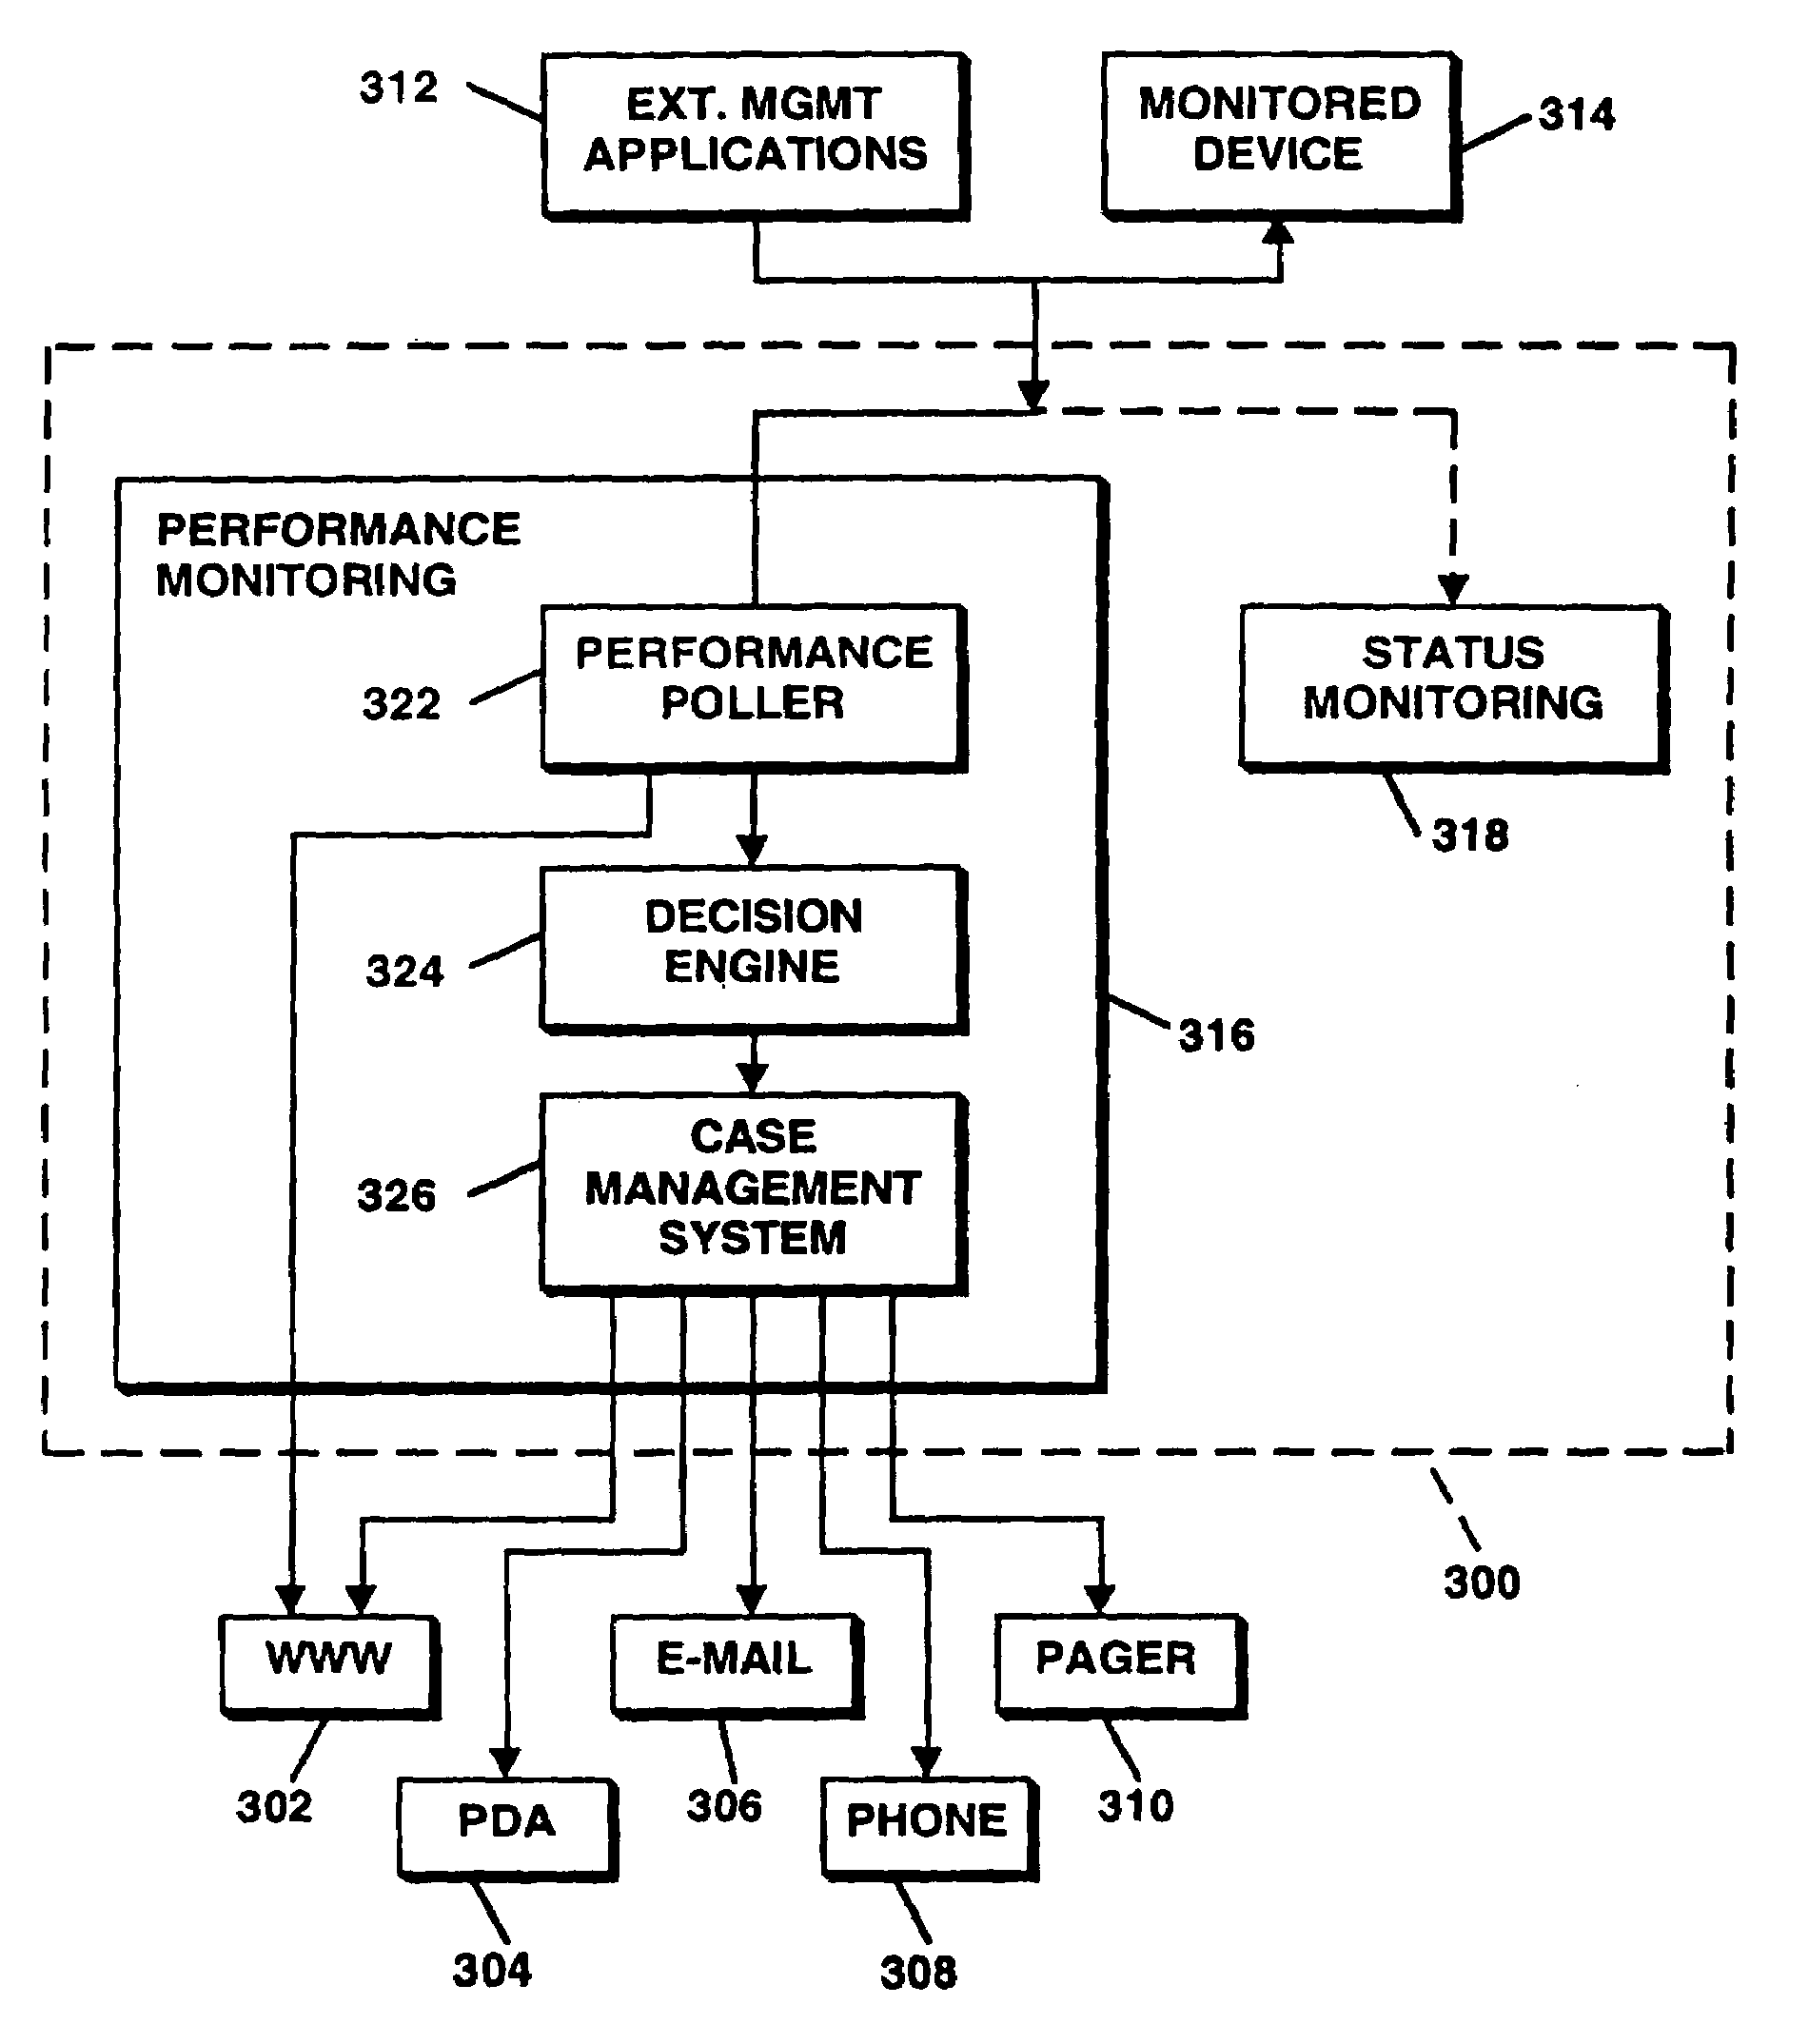 Method and apparatus for identifying problems in computer networks